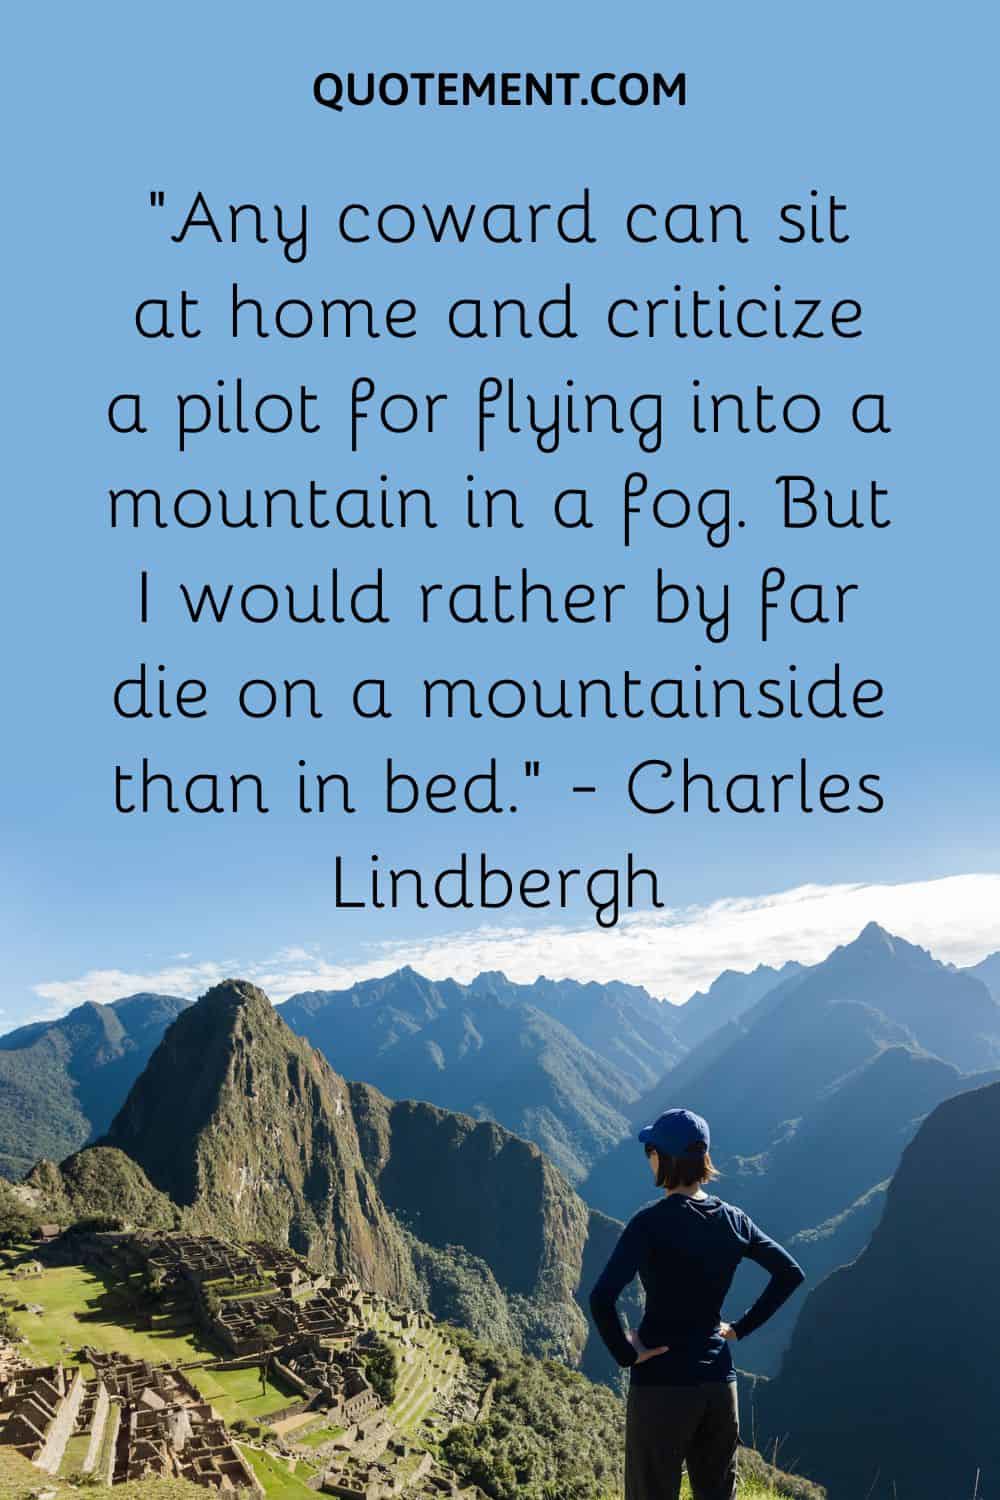 “Any coward can sit at home and criticize a pilot for flying into a mountain in a fog. But I would rather by far die on a mountainside than in bed.” — Charles Lindbergh